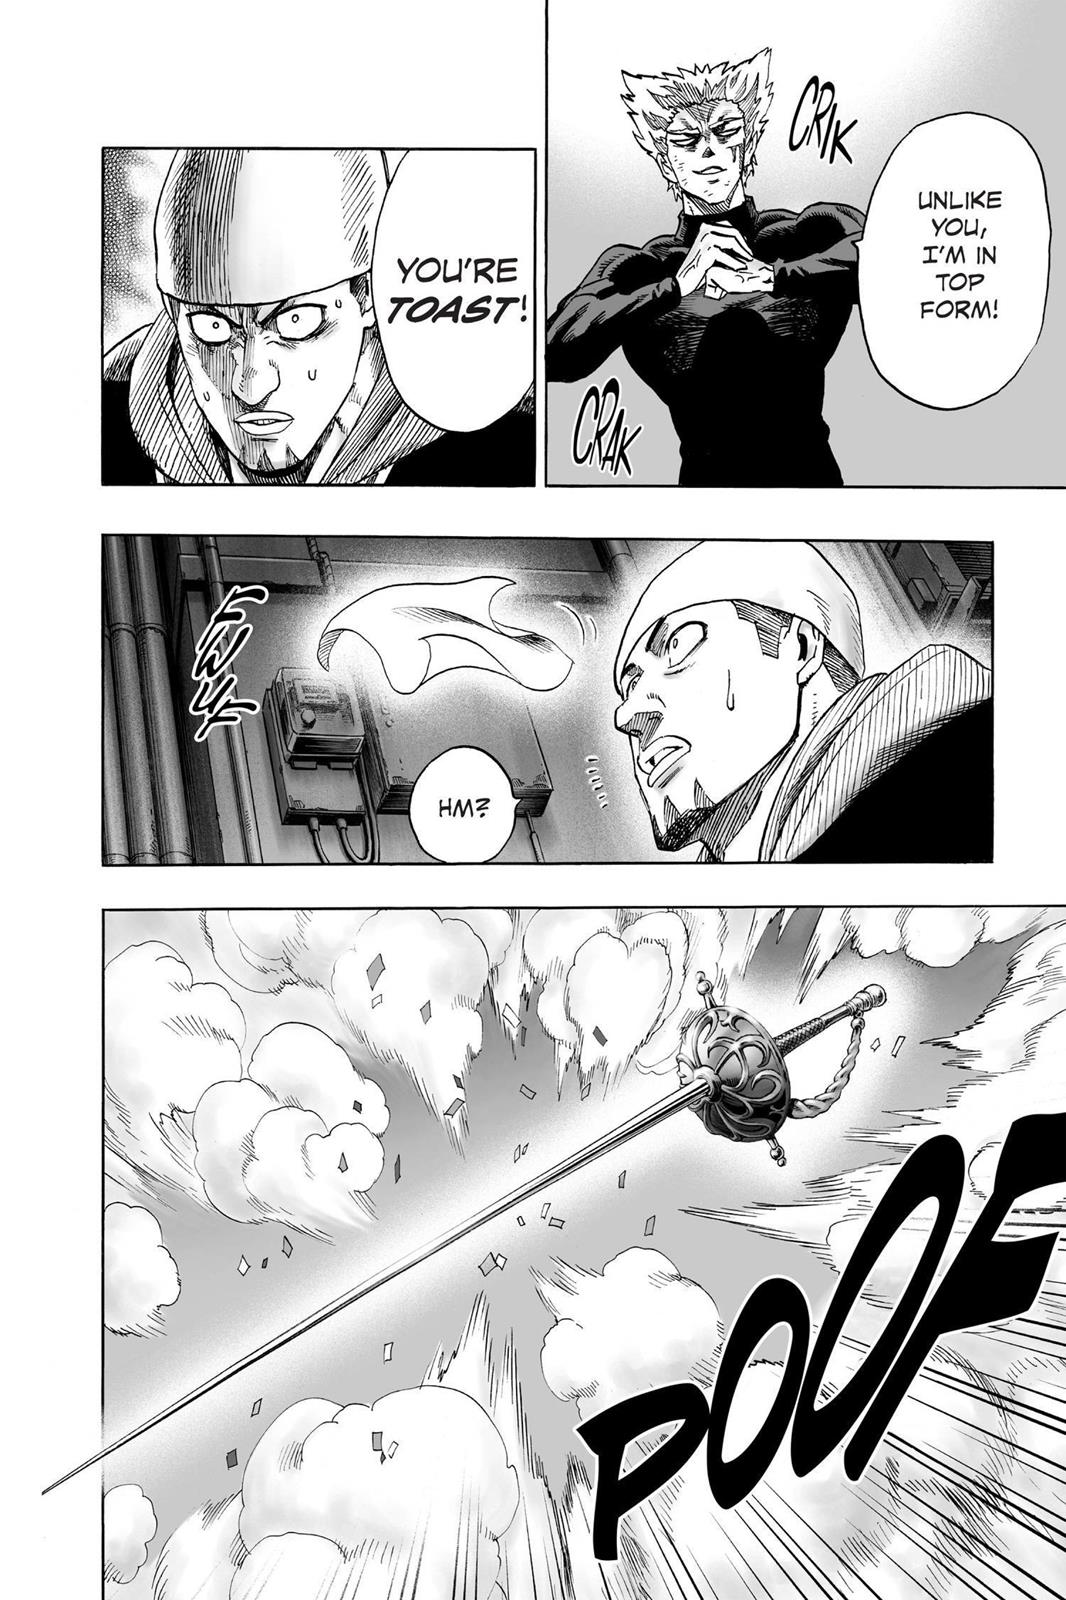 One-Punch Man, Punch 50 image 15